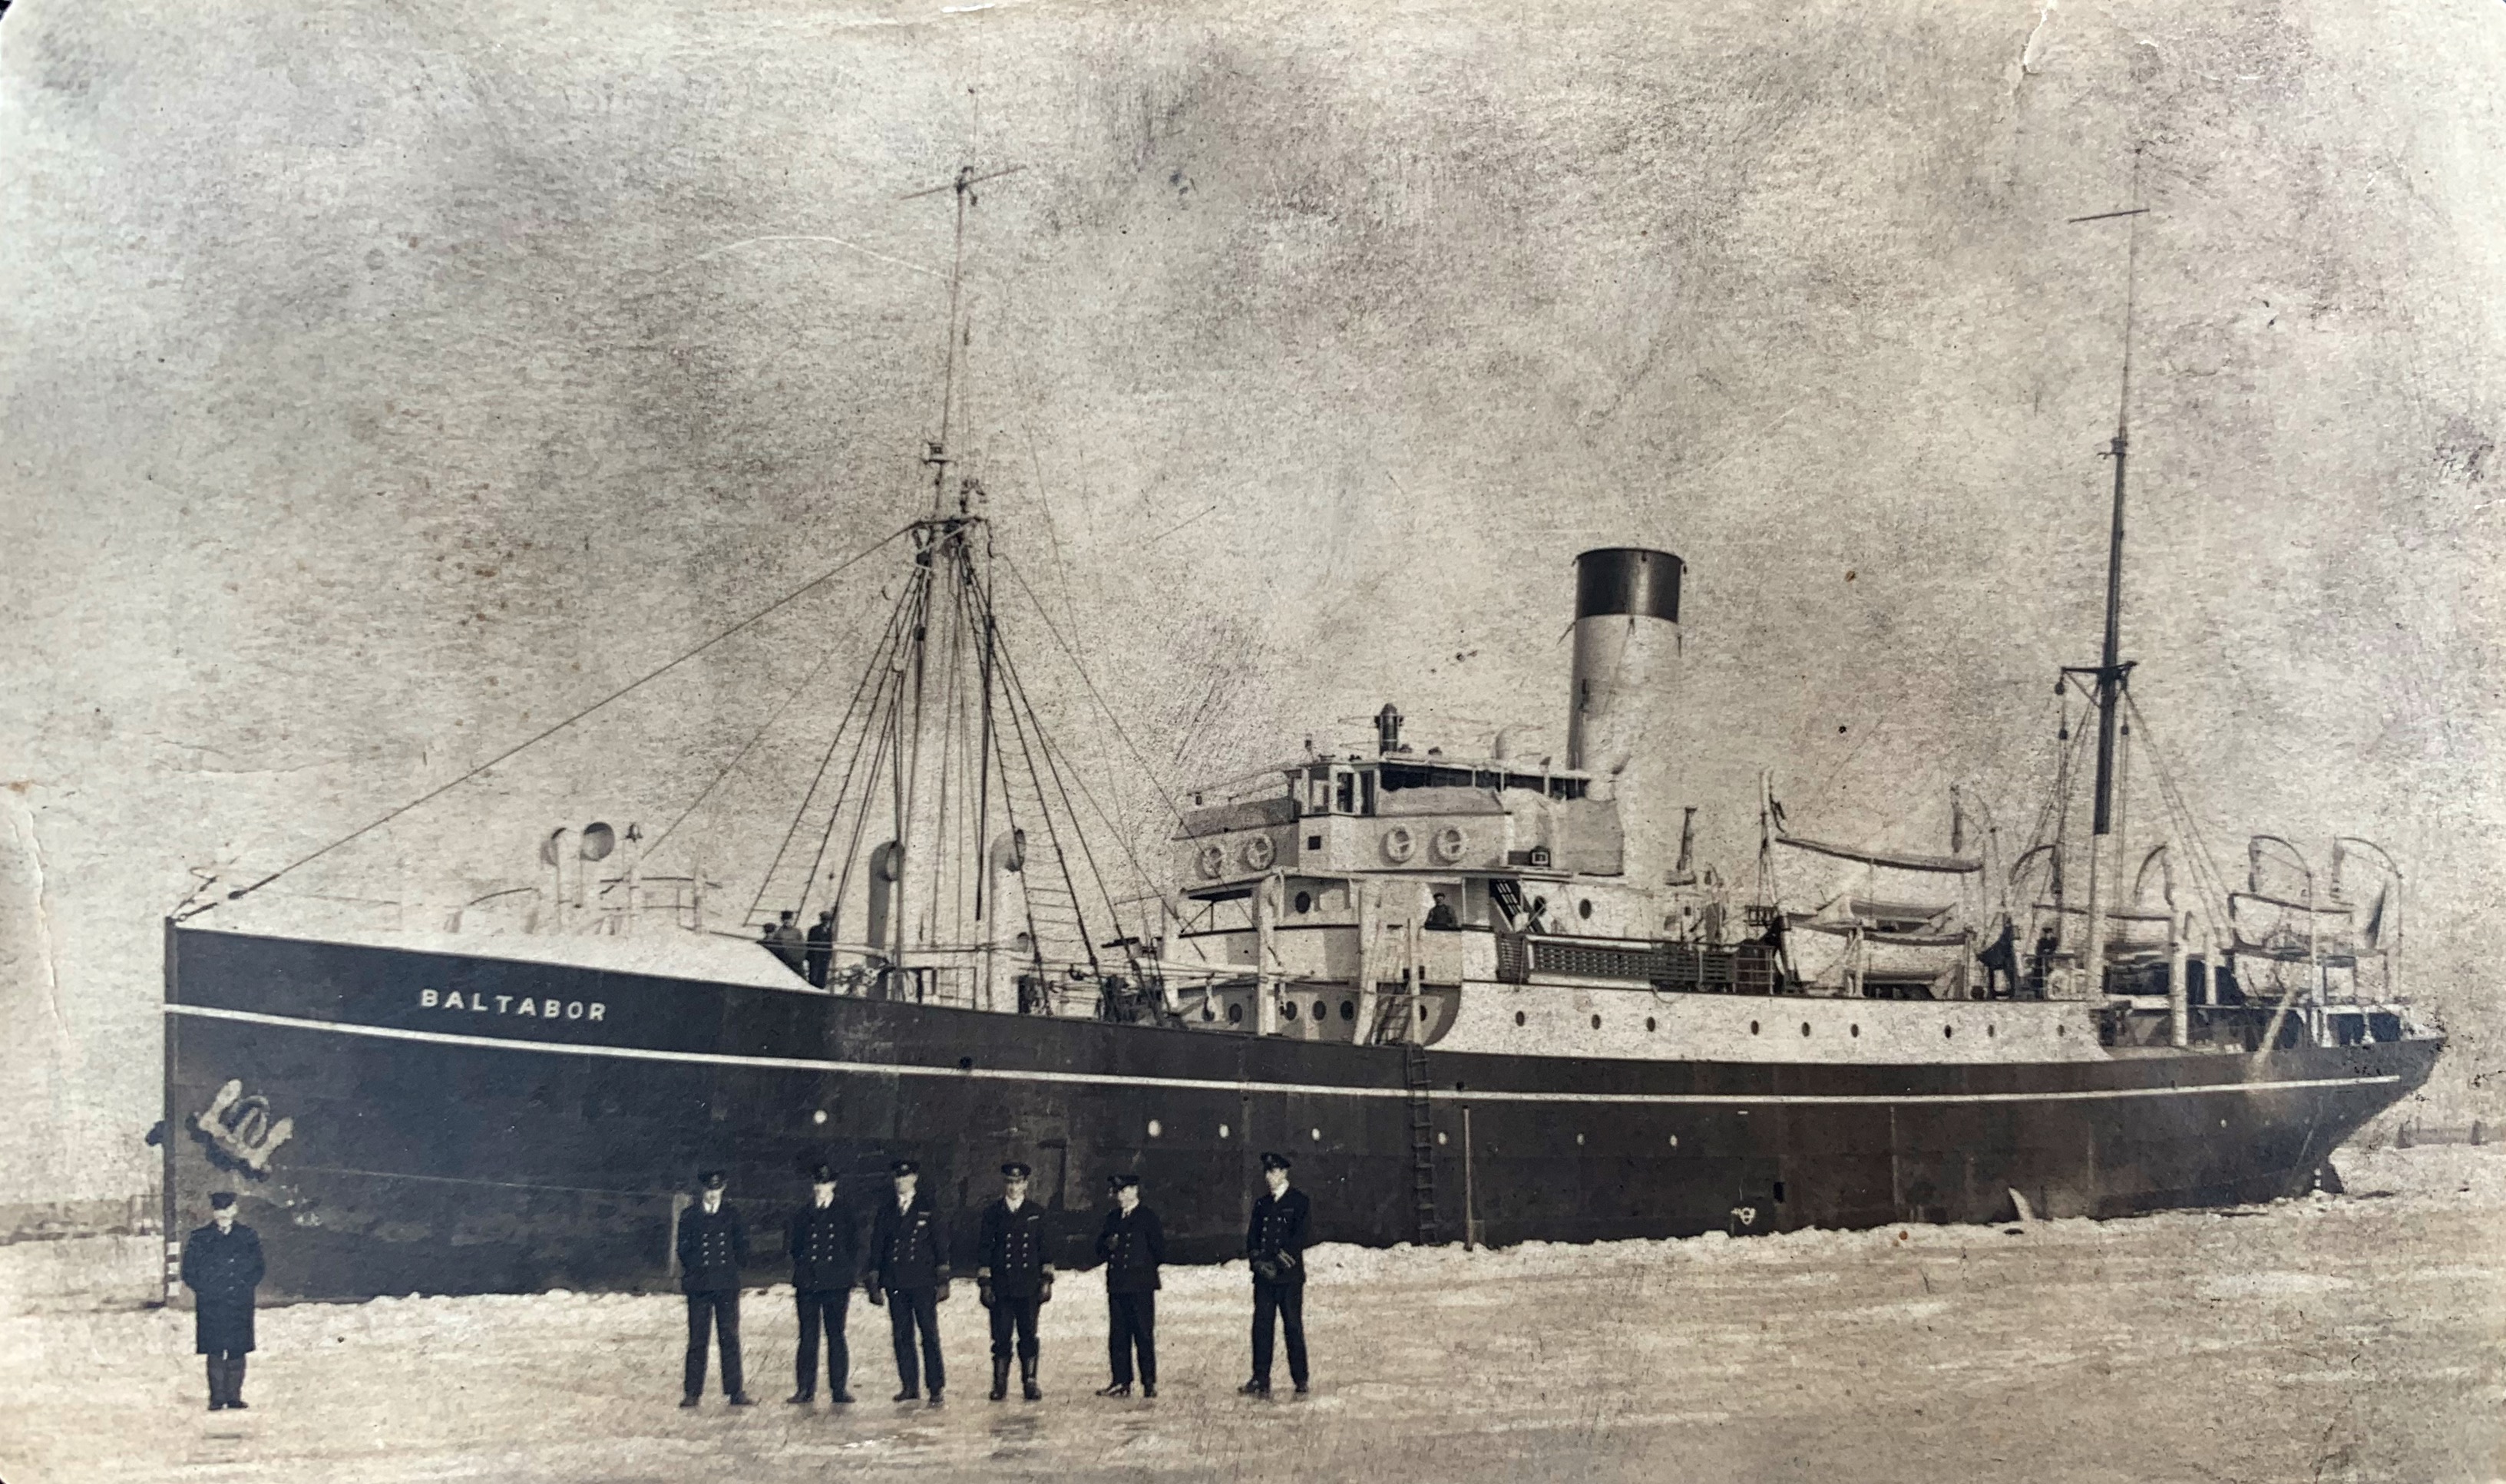 My great grandfather (far left) and his ship, the SS Baltabor, stuck in the ice for 18 days in Feb 1922, at the “Reil Canal”. My great grandfather was a Marconi (wireless) Operator in the British Merchant Navy for 20 years. 

Does anywhere know where the Reil Canal is?